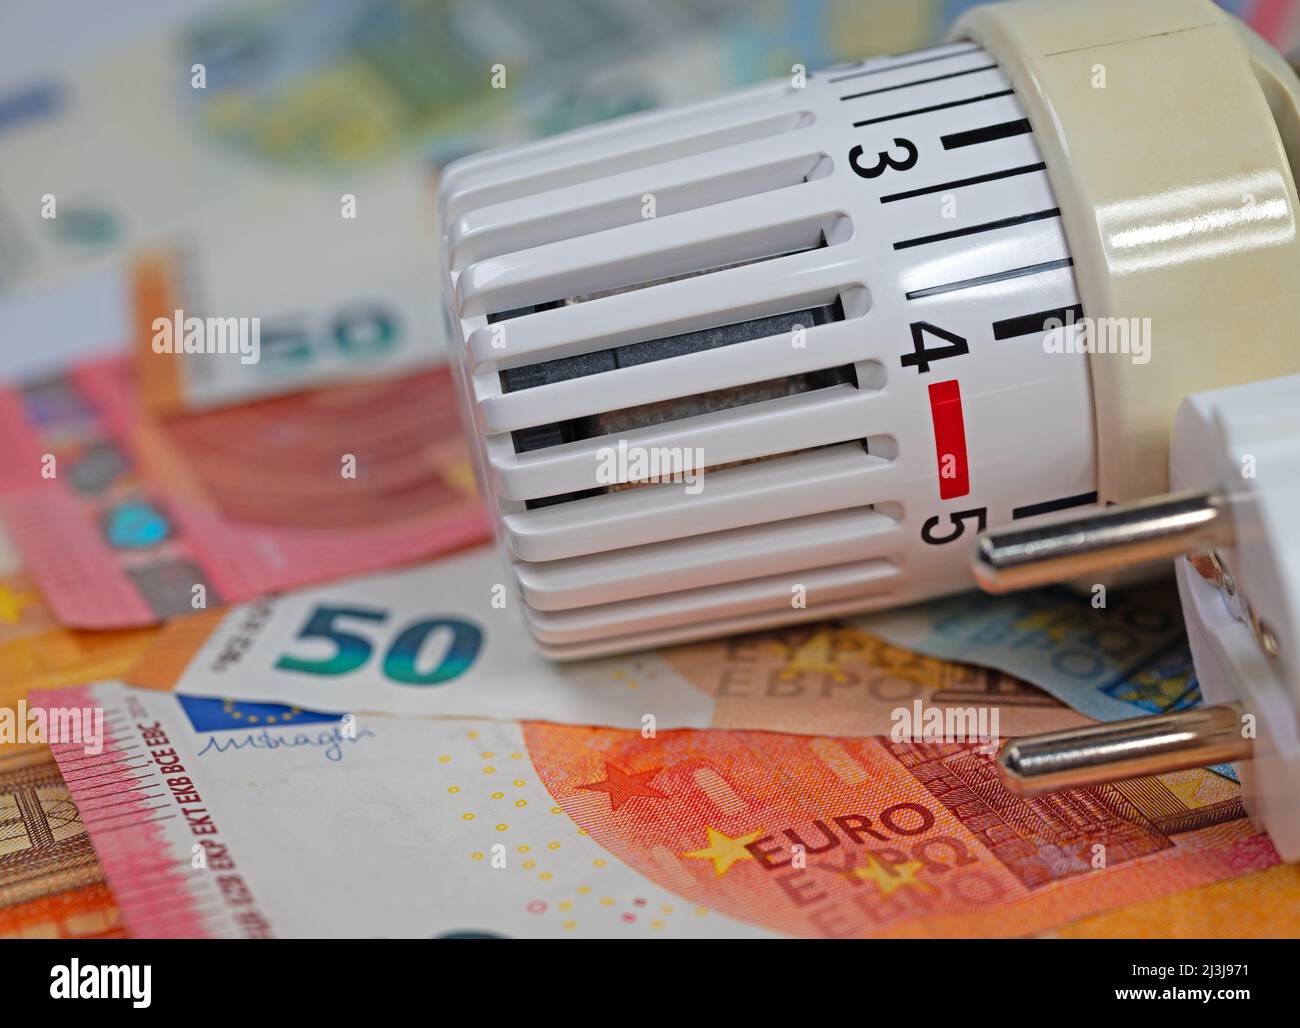 Thermostat in front of banknotes, symbolic of heating costs Stock Photo